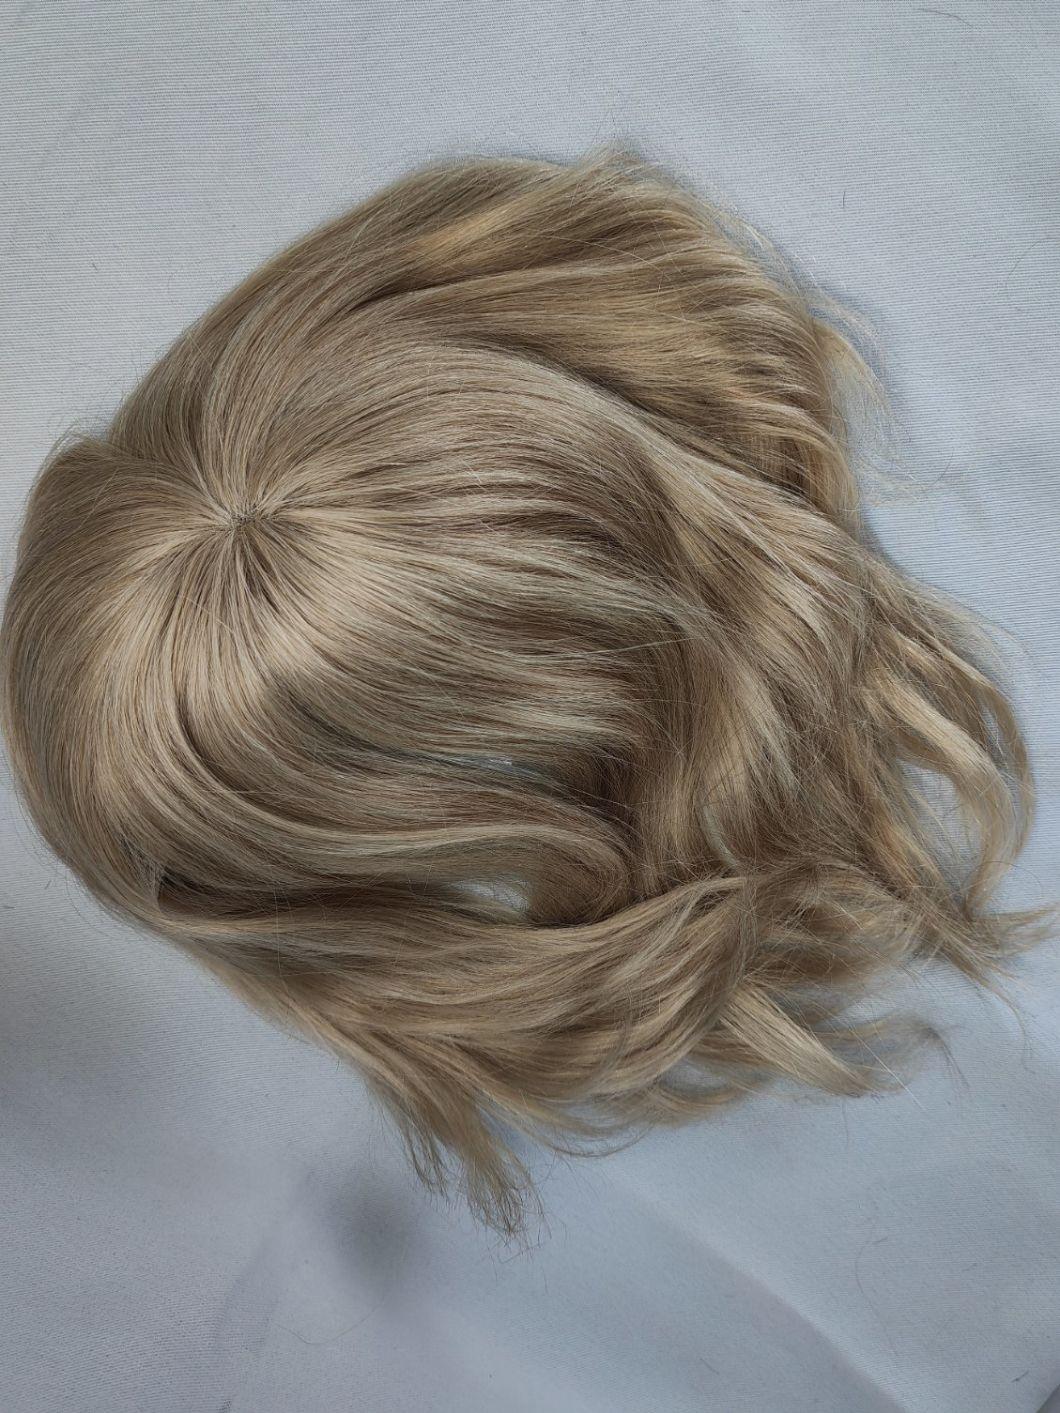 2022 Most Popular Fine Welded Mono Human Hair Wig Made of Human Remy Hair